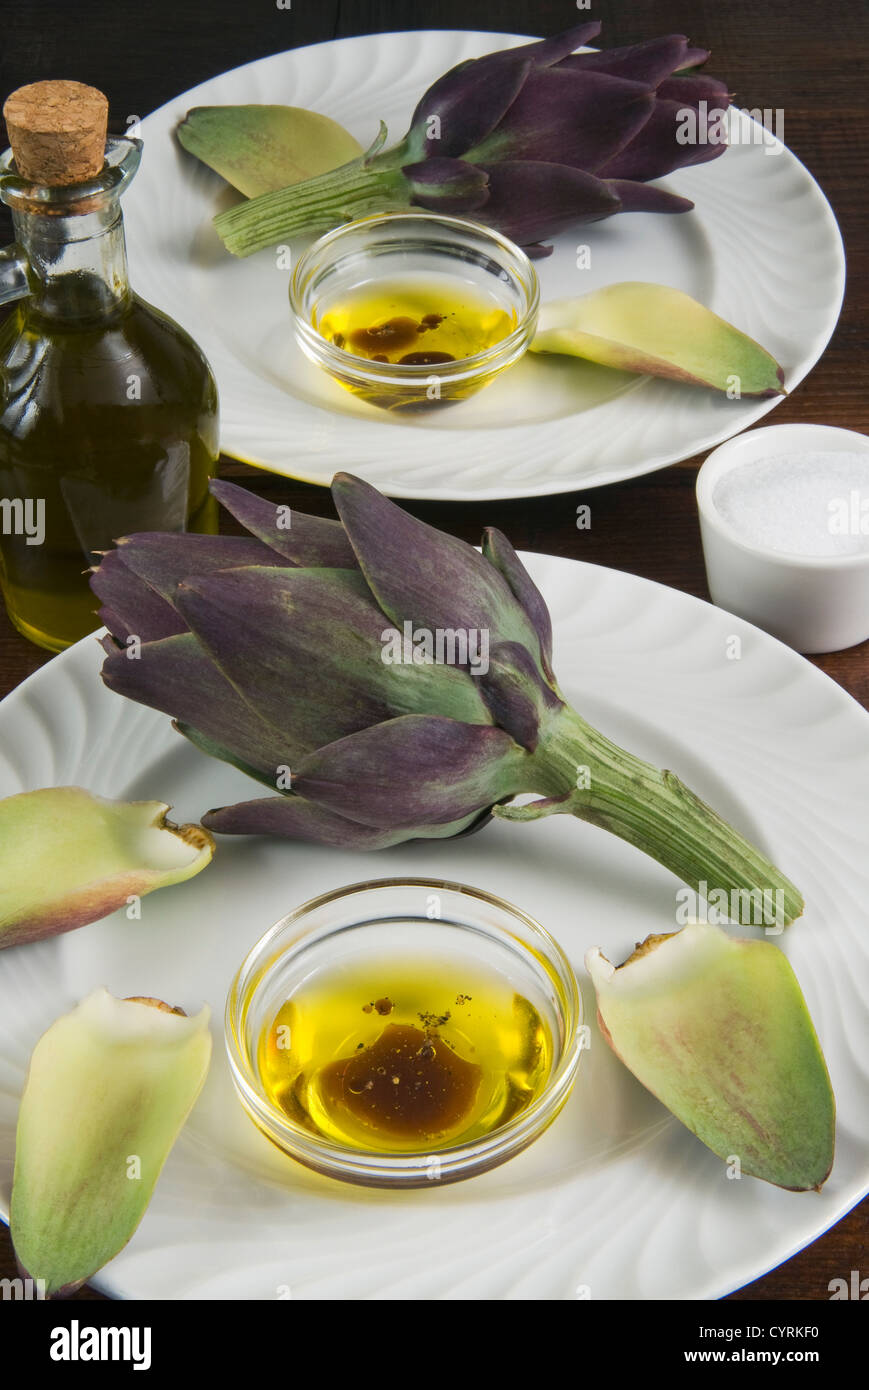 Artichoke with dipping sauce (oil, salt, pepper and vinegar) Stock Photo